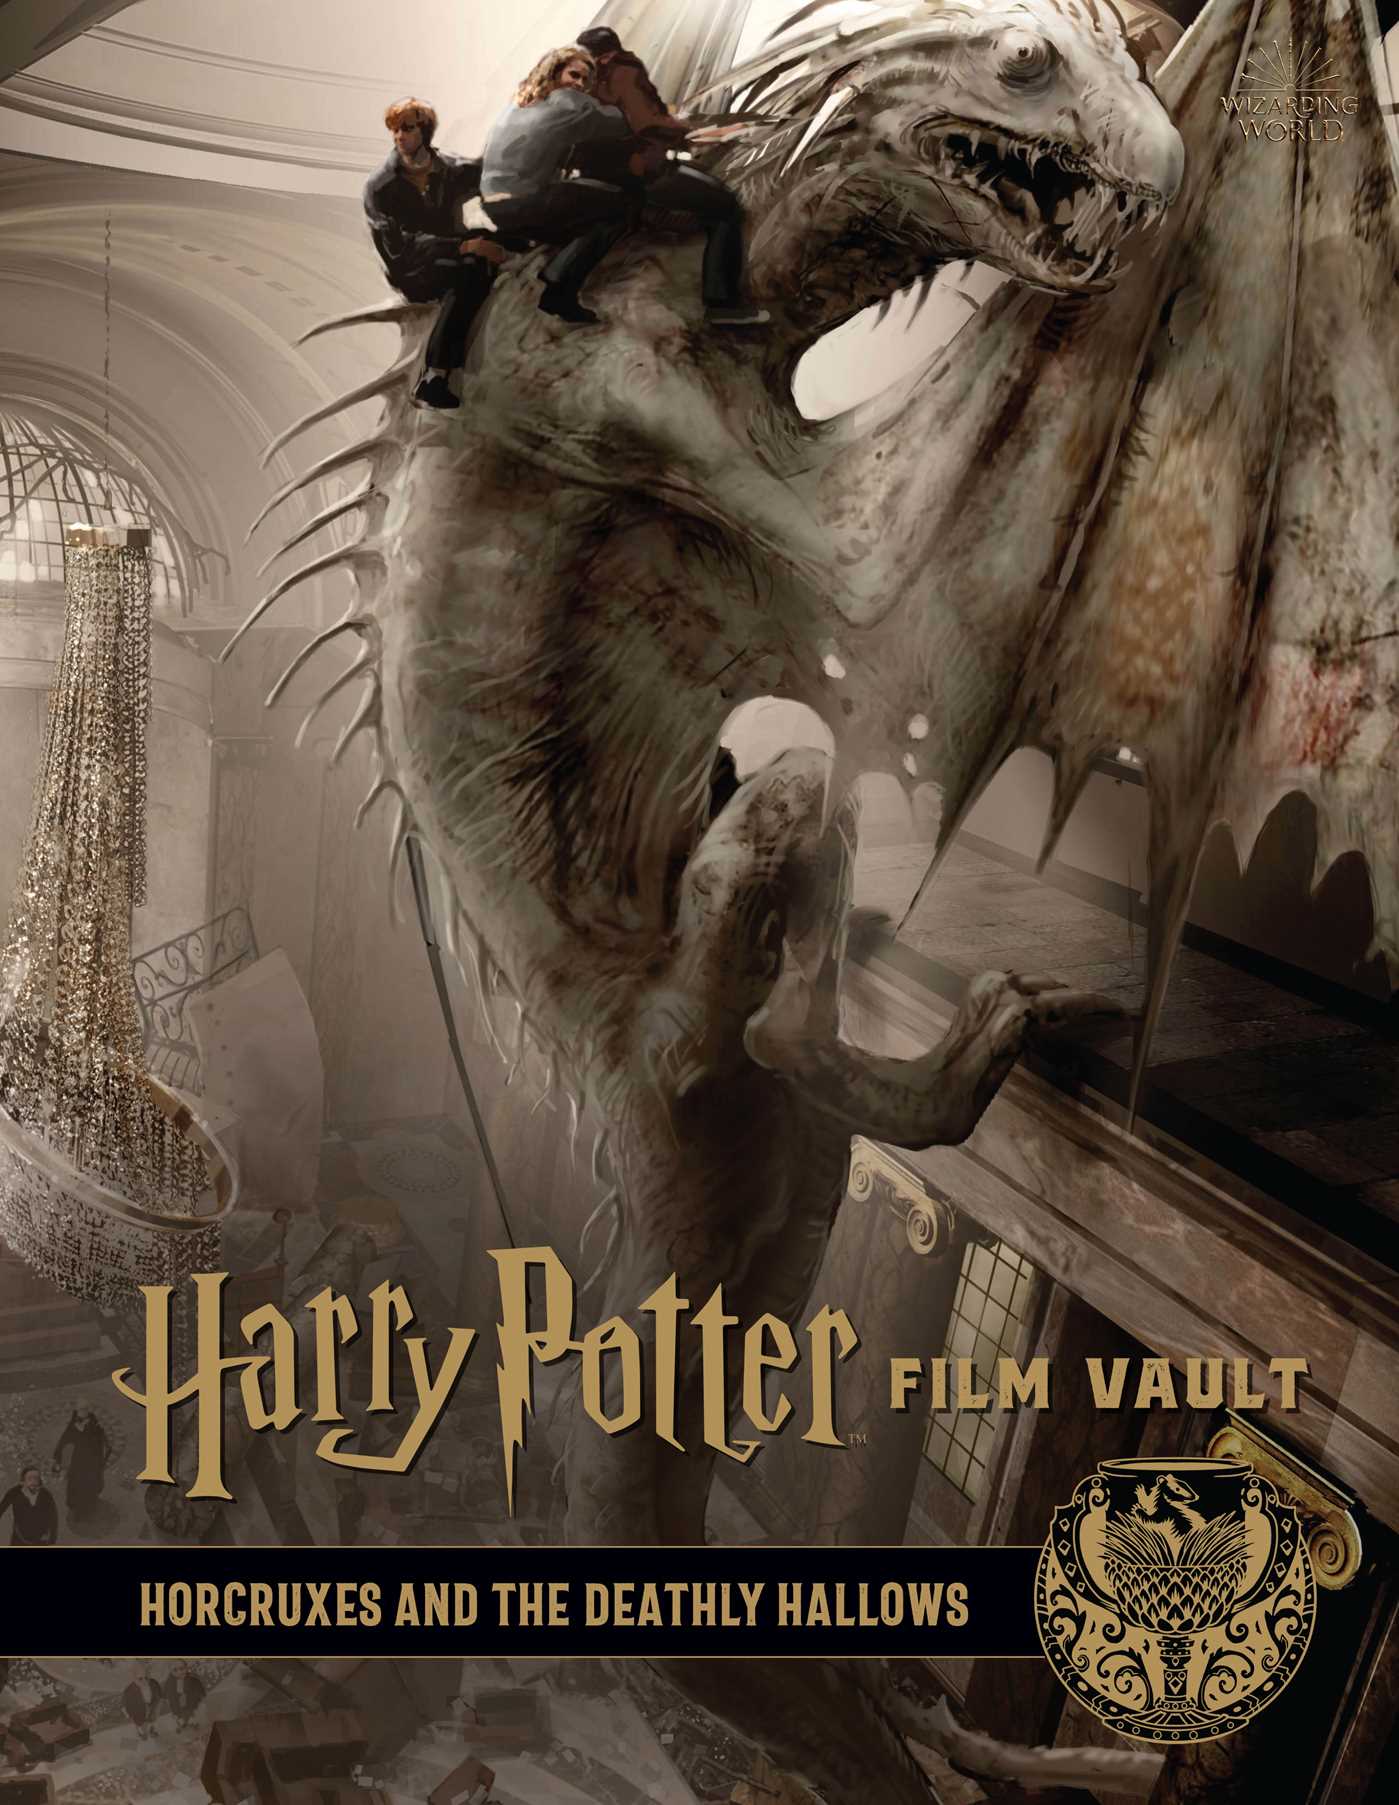 The Harry Potter Movies: Exploring the Mysterious Artifacts and Objects